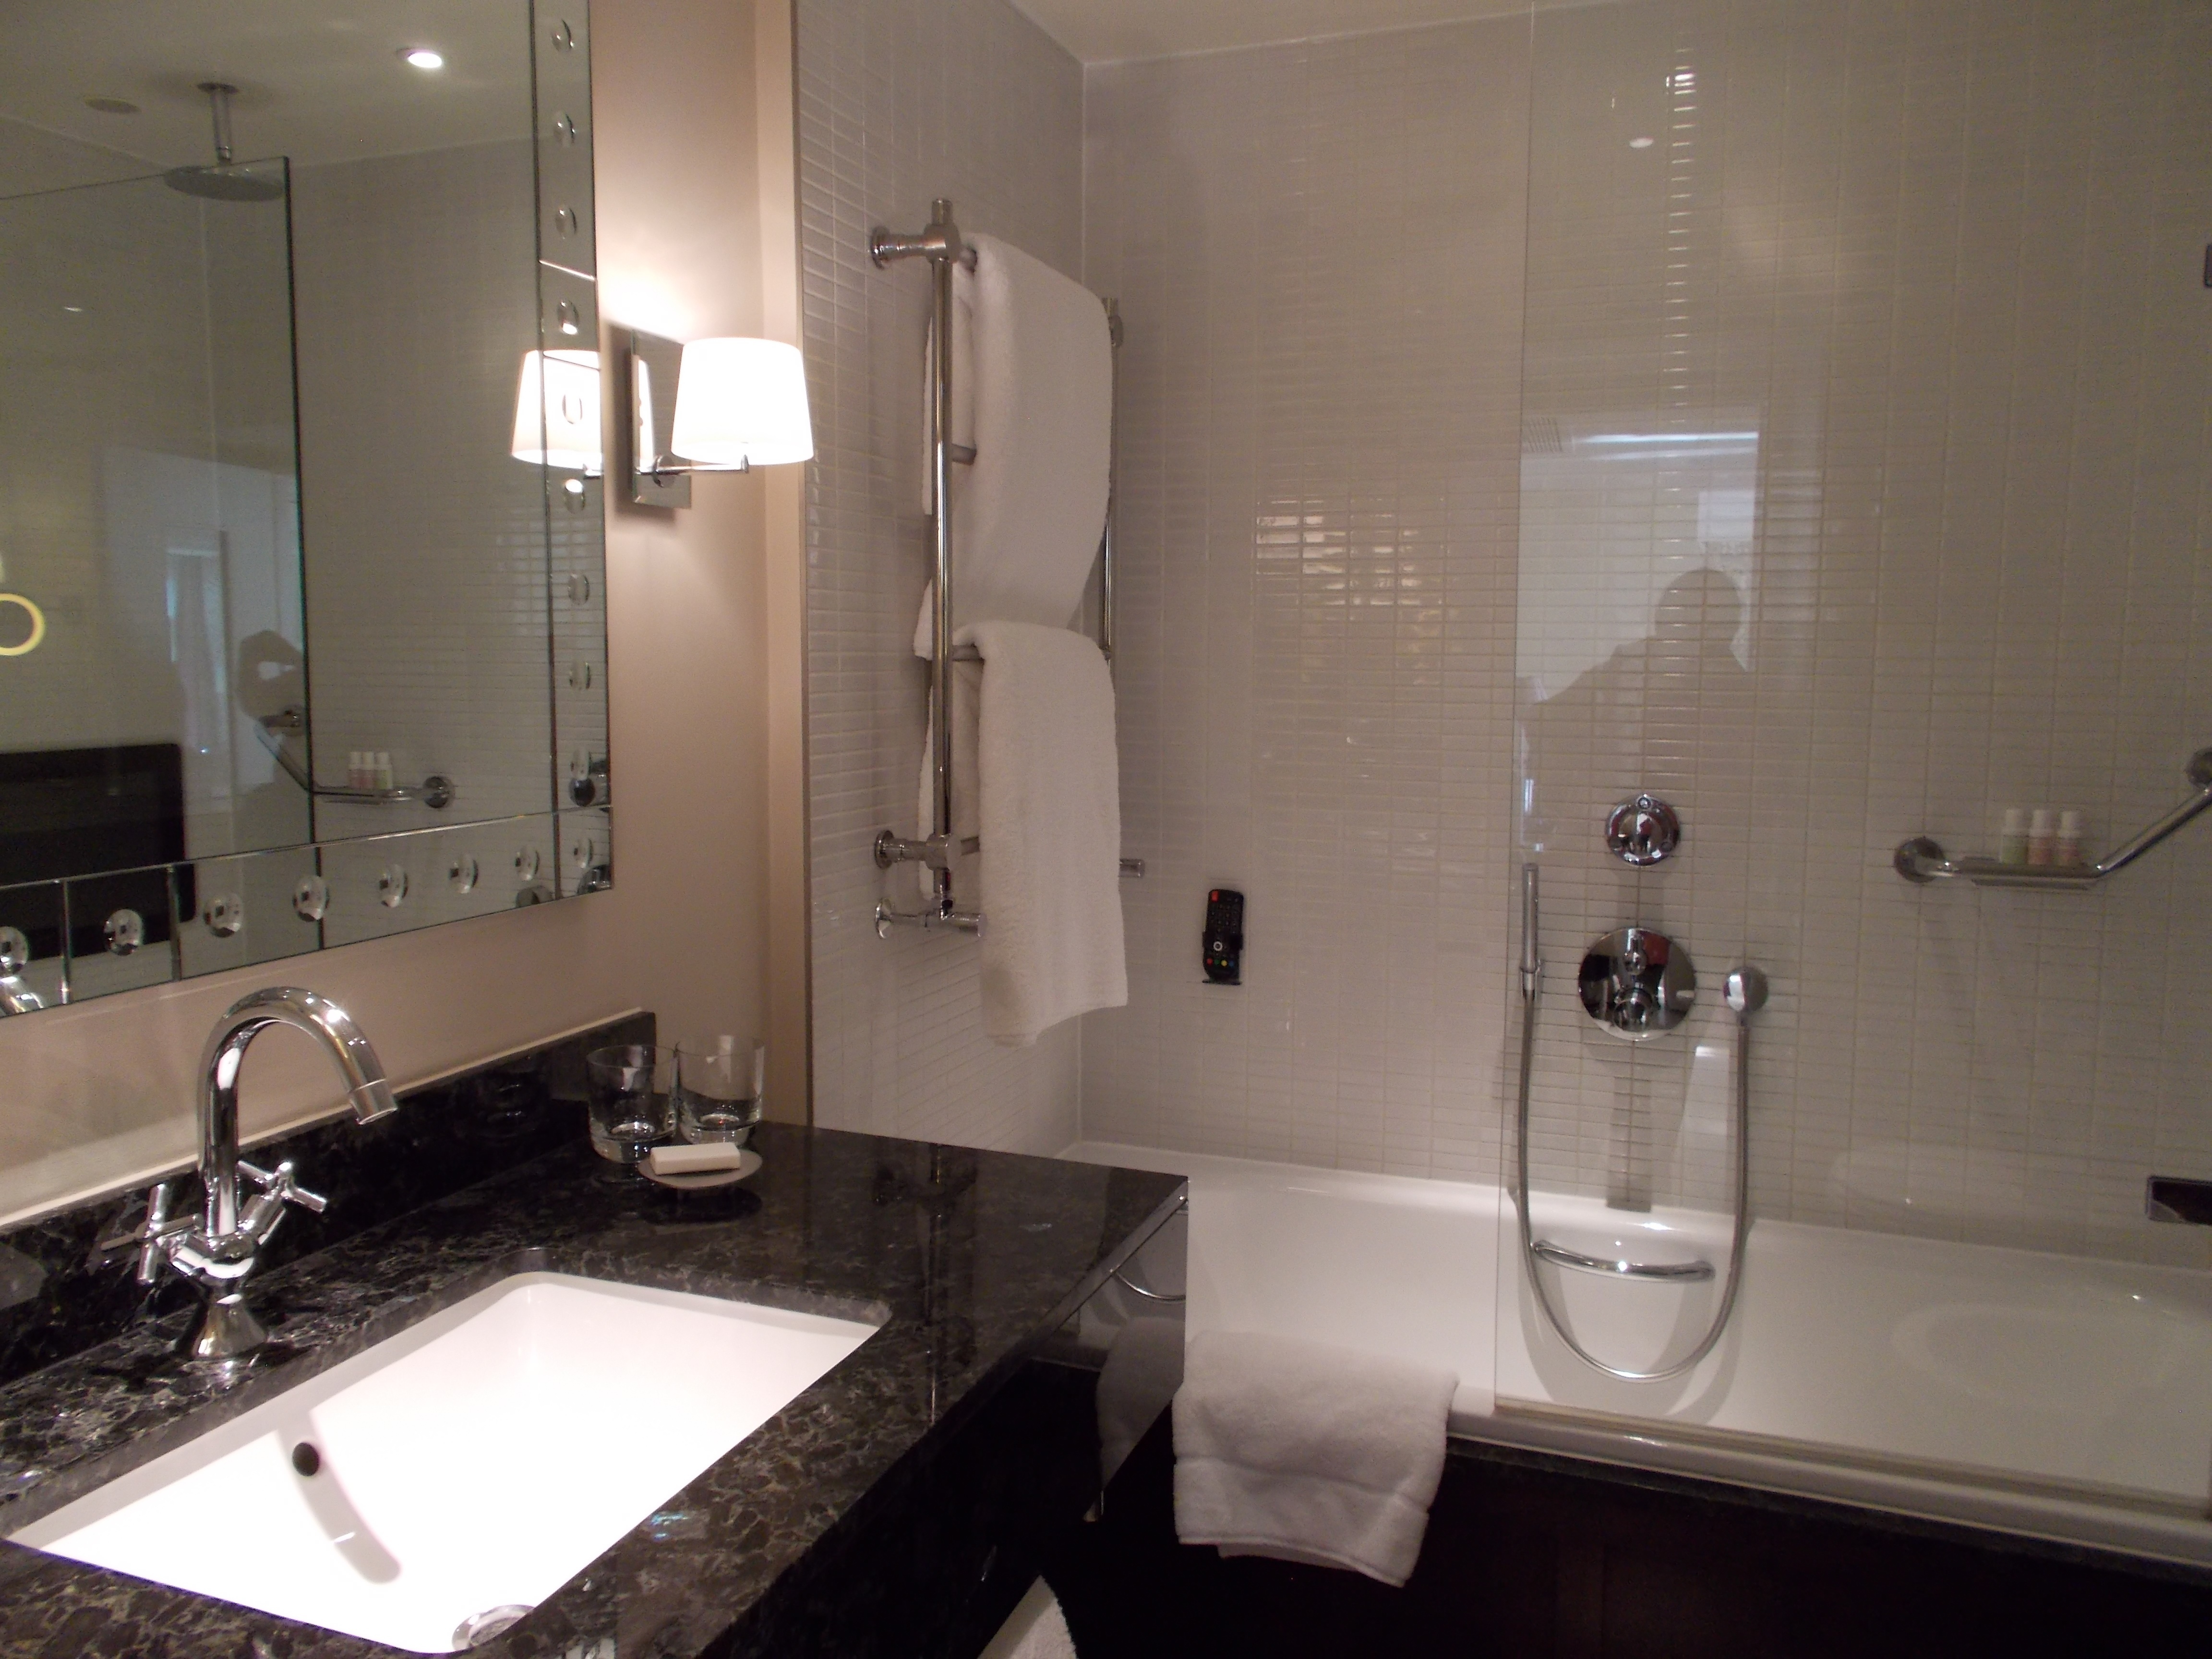 Bathroom The Executive Suite The Arch London